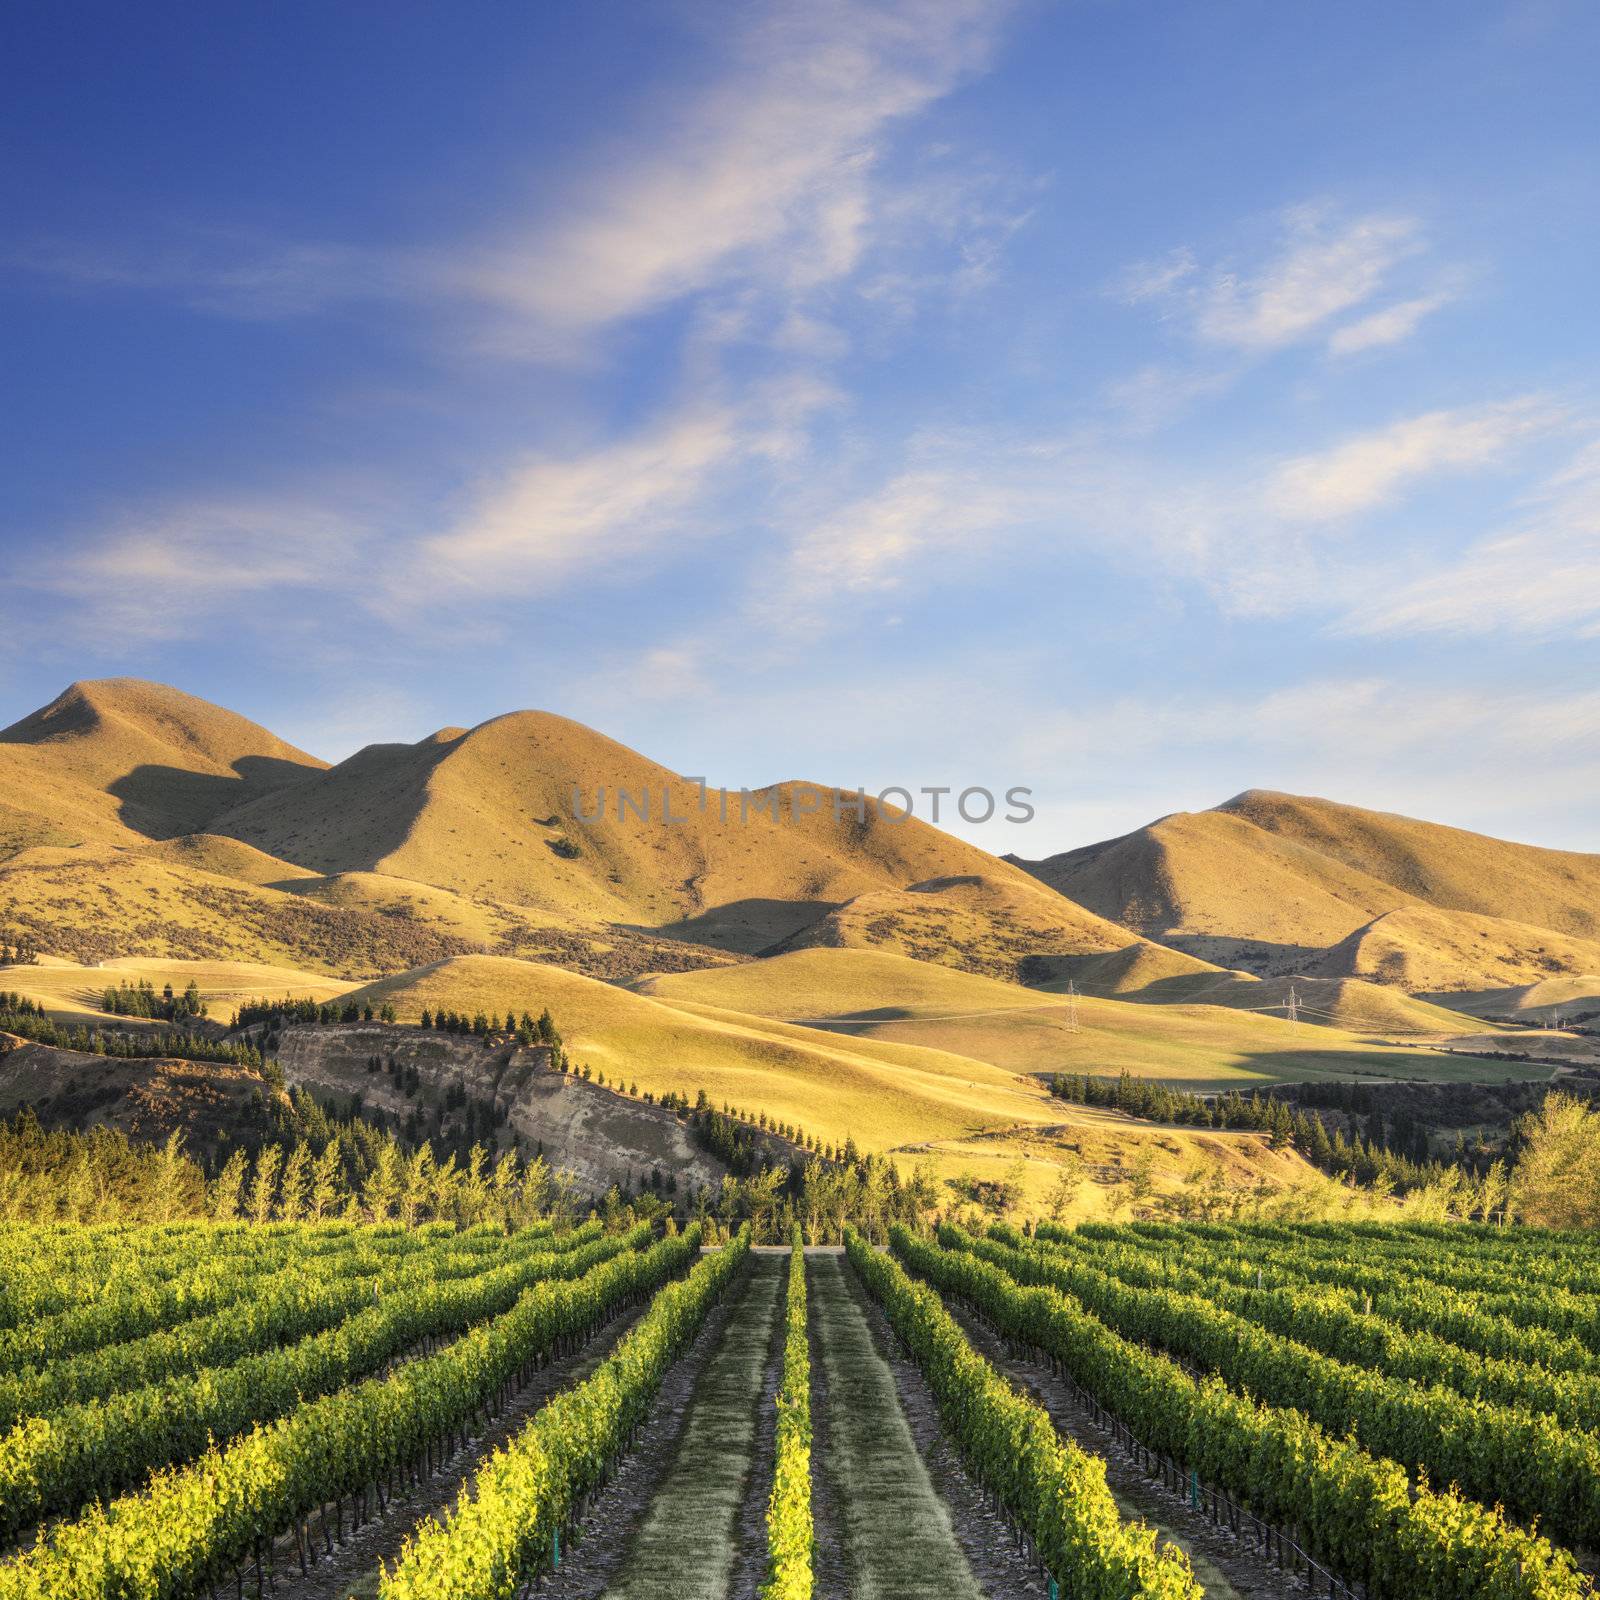 A vineyard near Waipara, in North Canterbury, New Zealand, in early morning sunlight. Tonemapped HDR image.